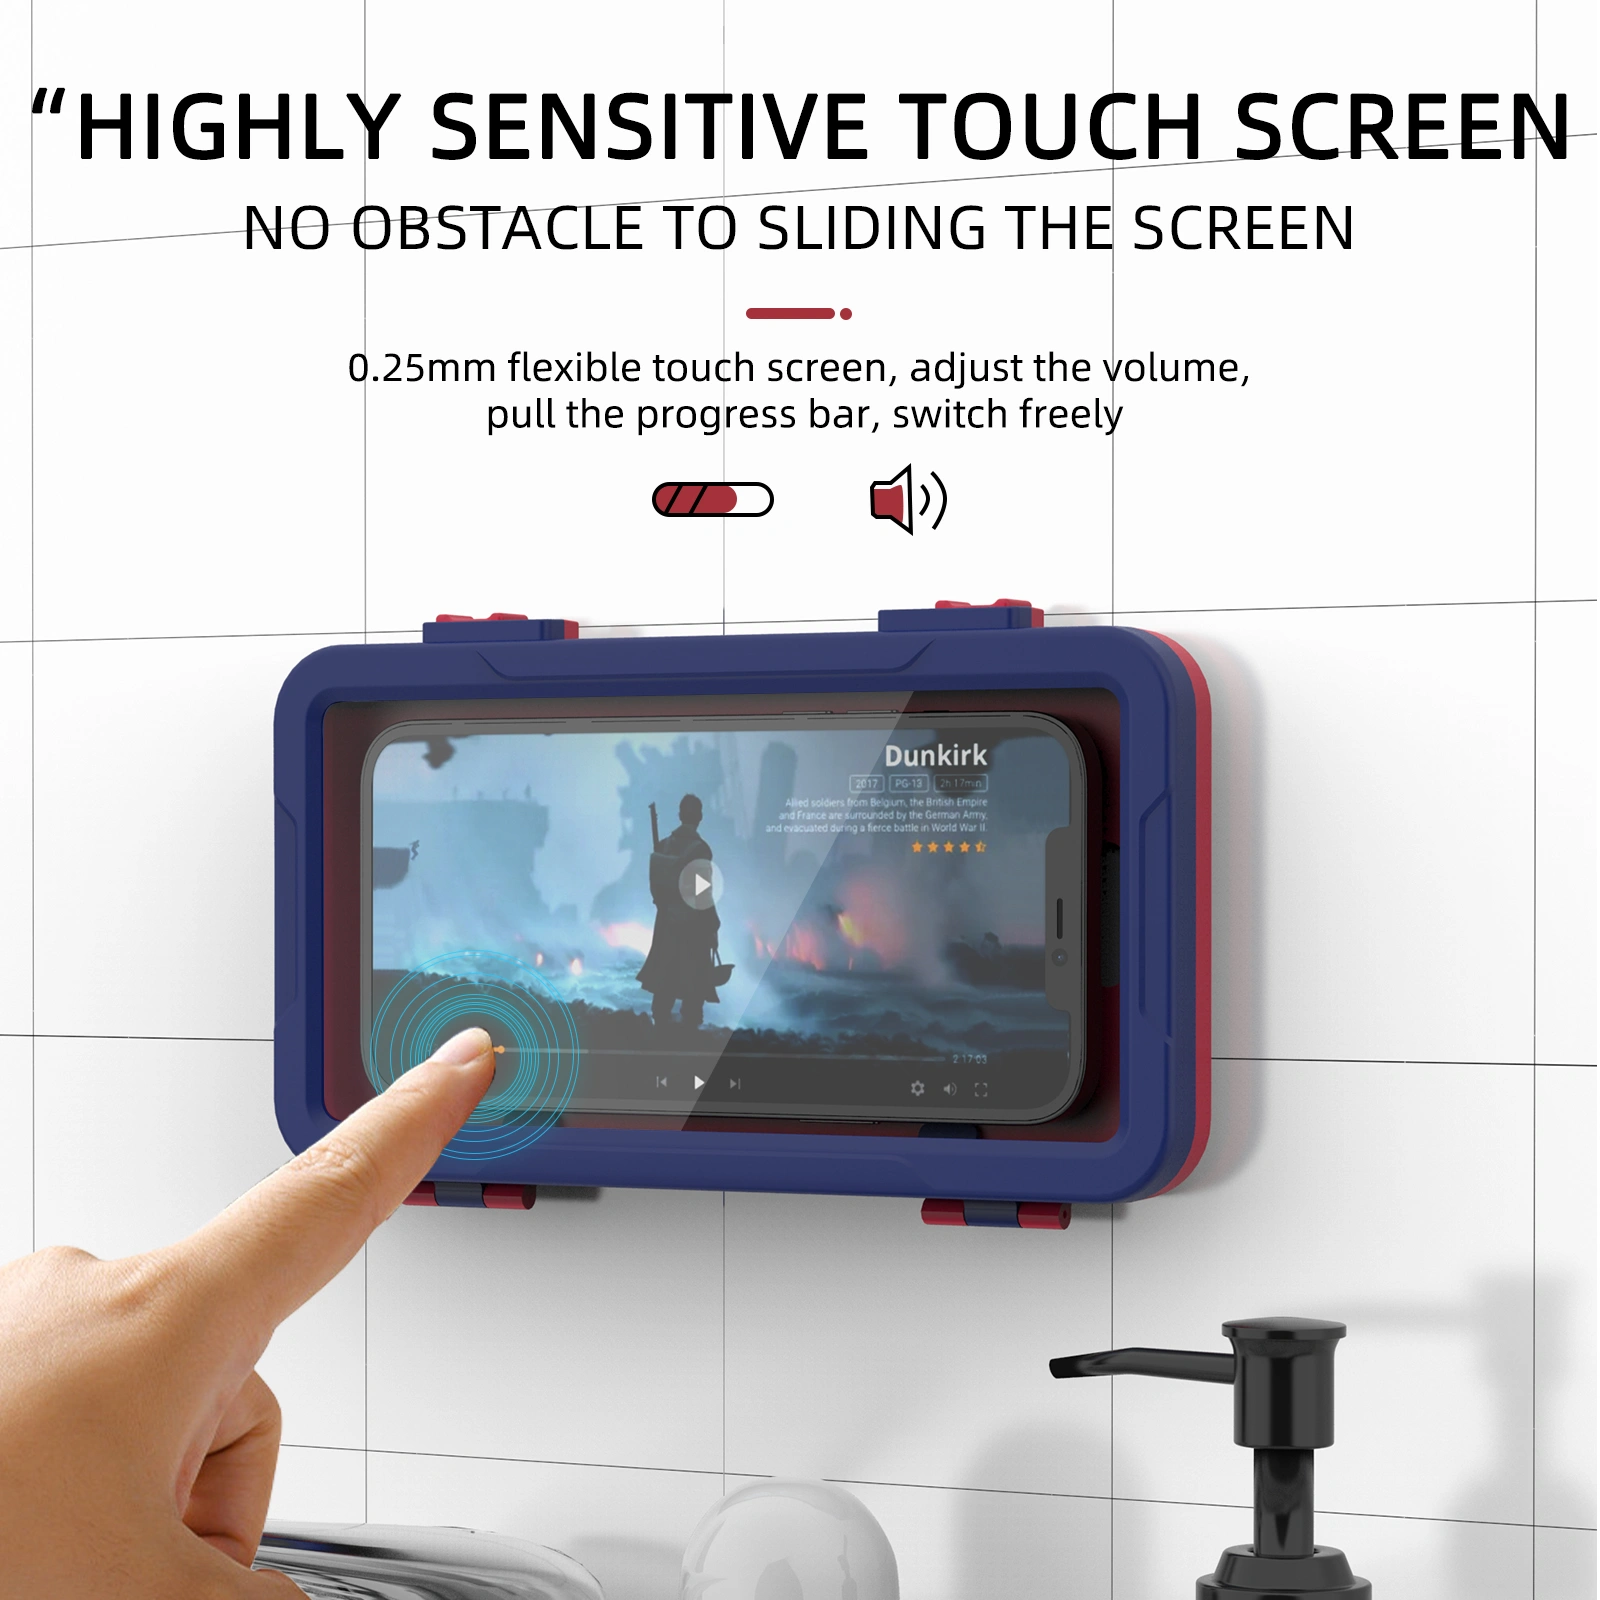 highly sensitive touch screen